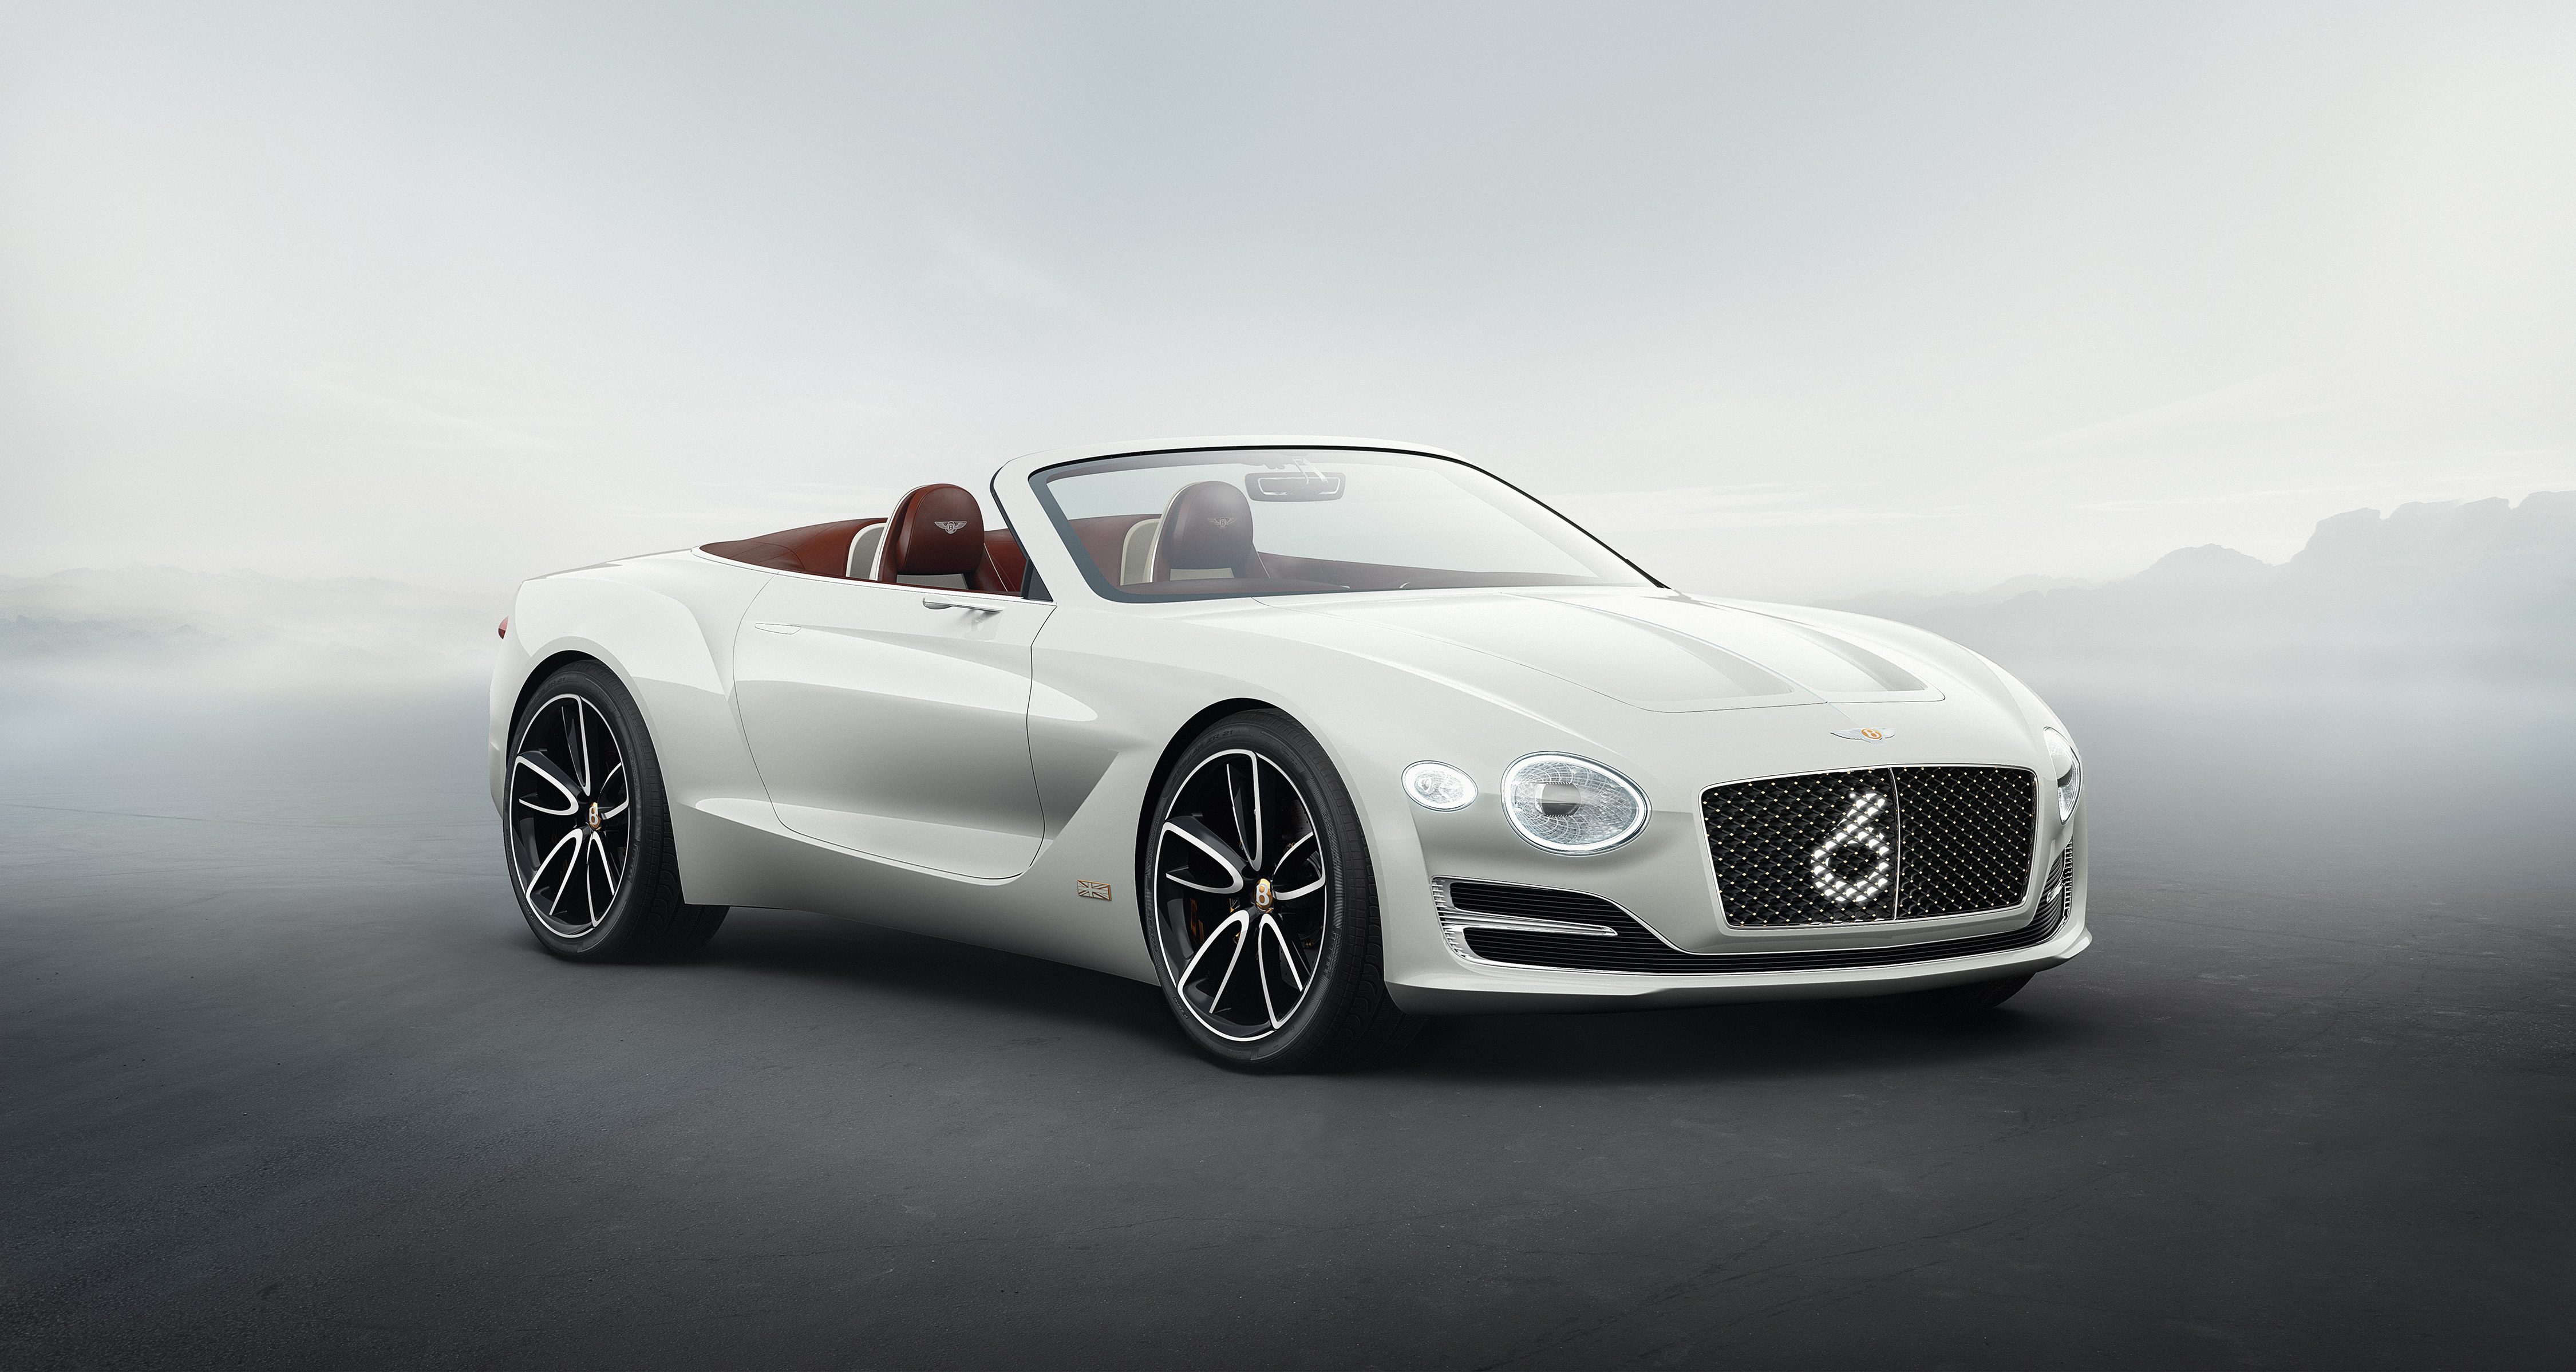 Bentley wants feedback for its first allelectric vehicle, starts with showing a stunning new